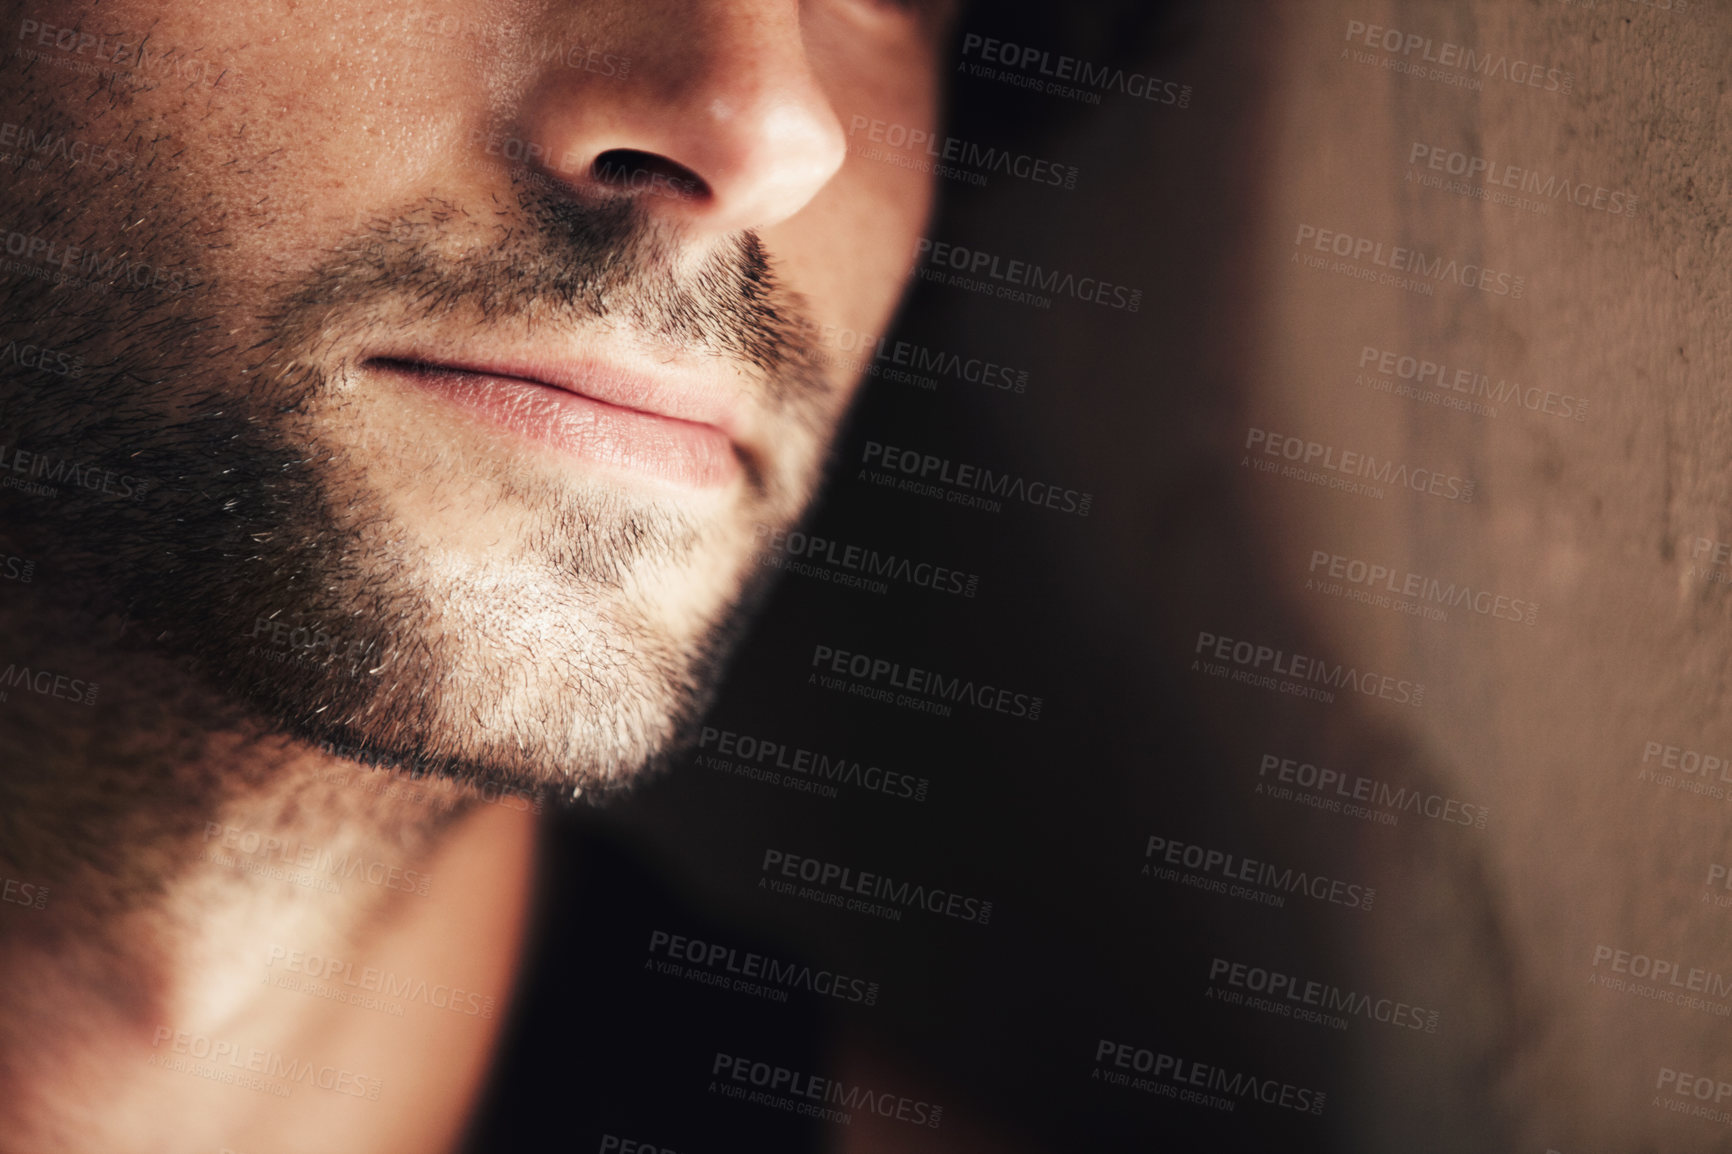 Buy stock photo Cropped image of the lower half of a handsome man's face